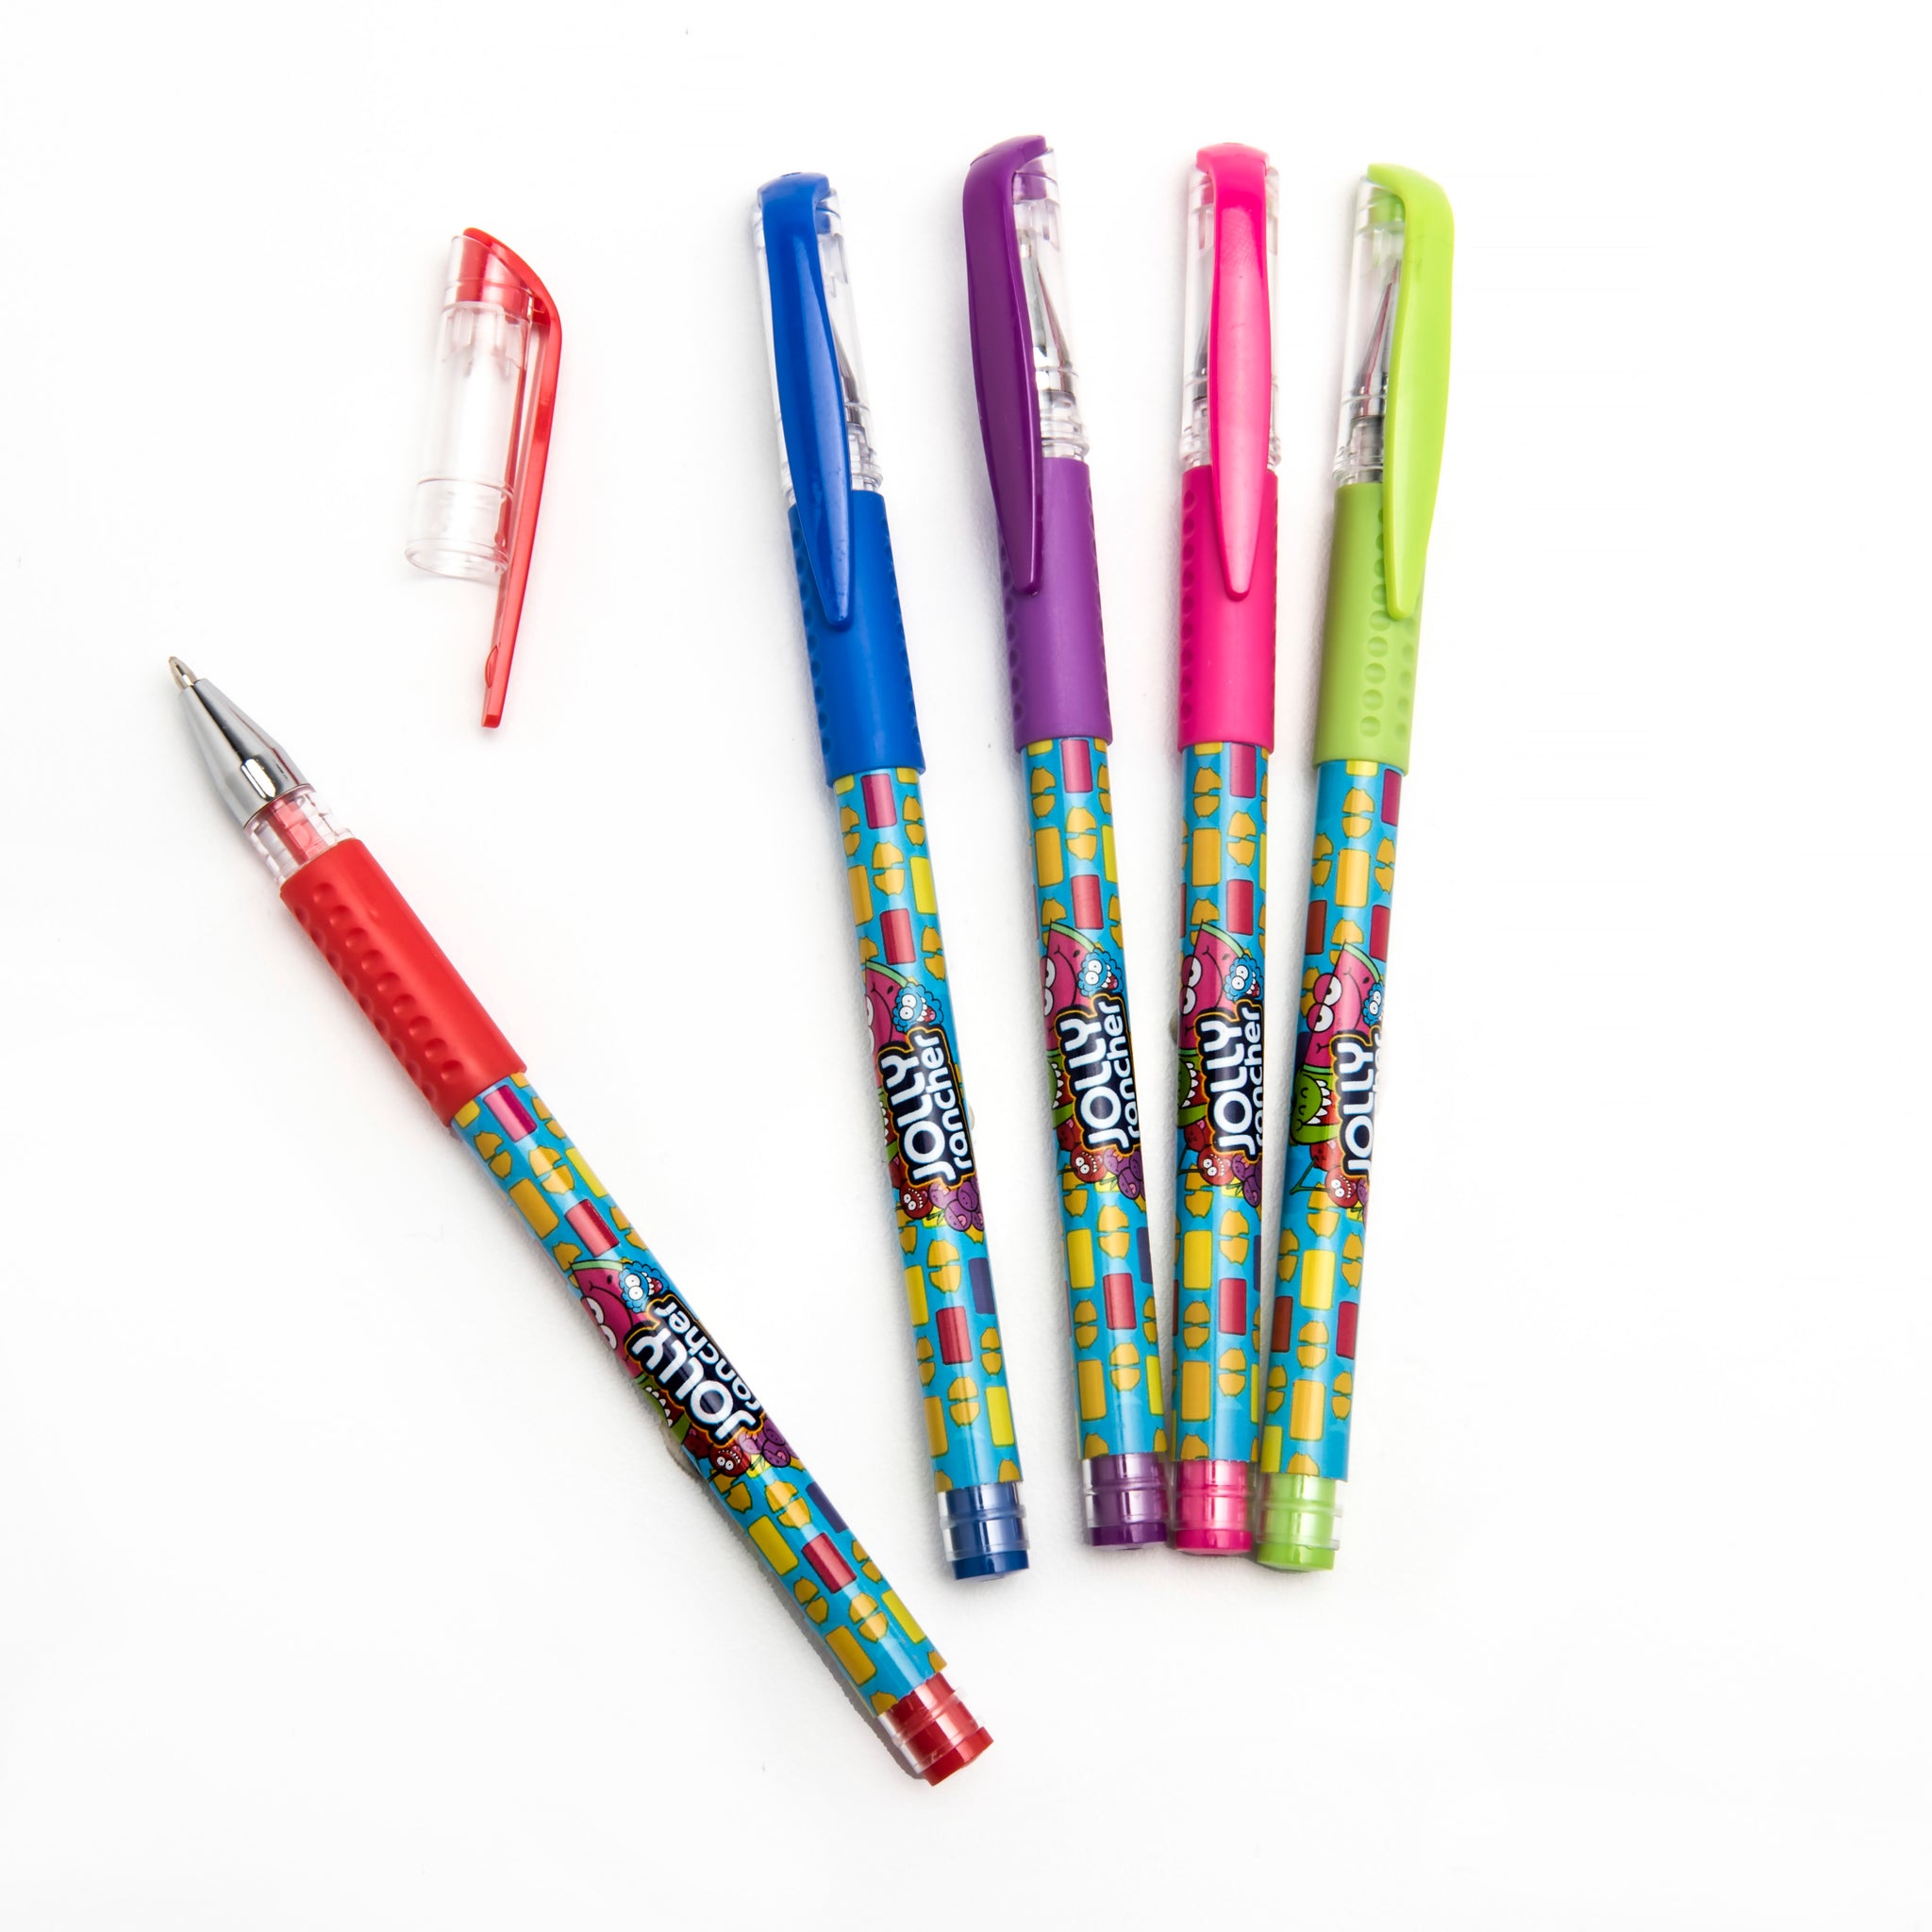 Take advantage of our large range of Jolly Rancher 5ct Scented Felt Tip  Pens Jolly Rancher products for affordable costs